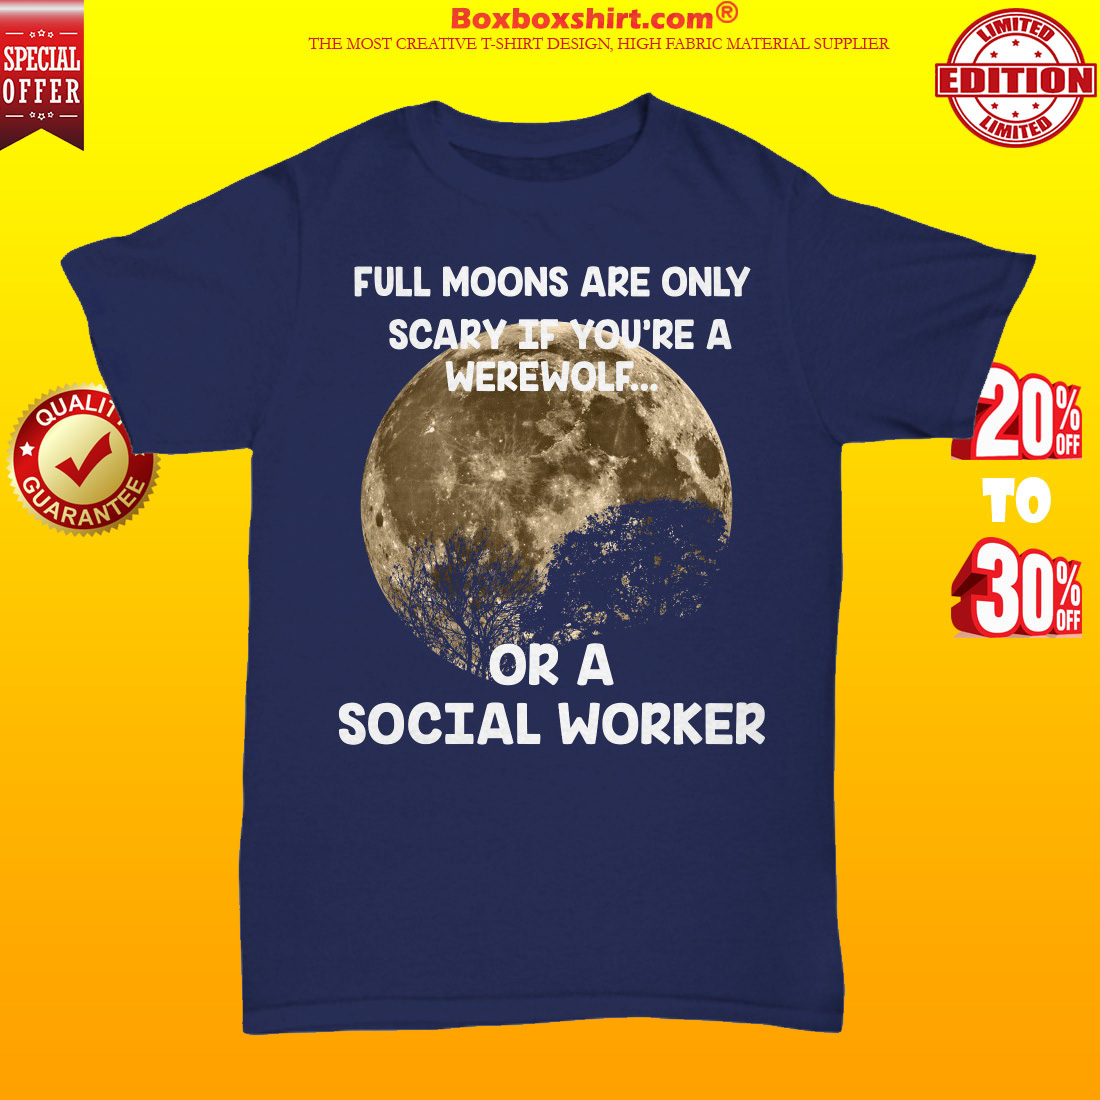 Full moons are only scary if you are a werework or a social worker unisex tee shirt